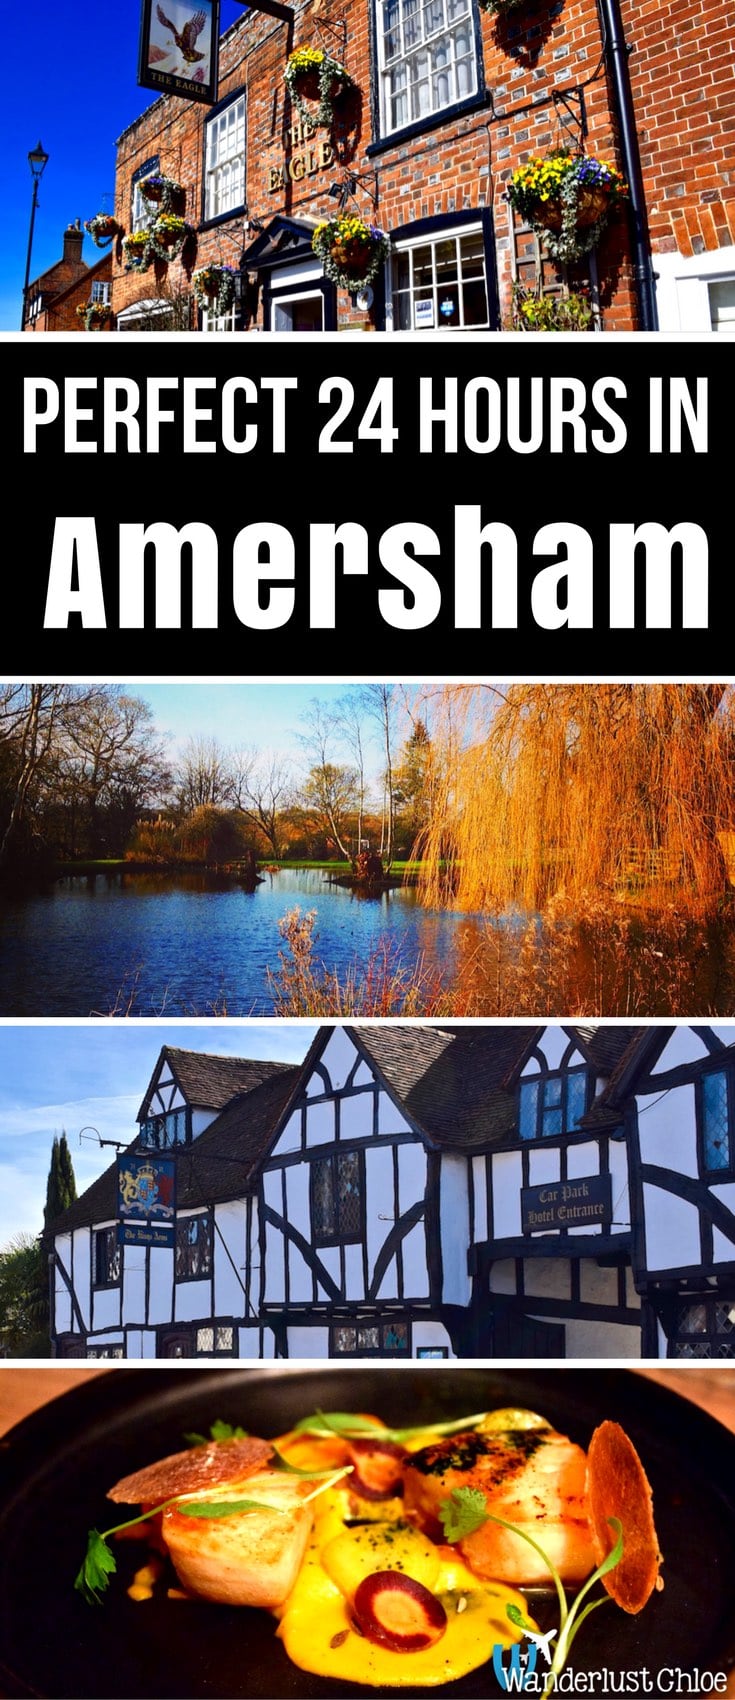 Perfect 24 Hours In Amersham